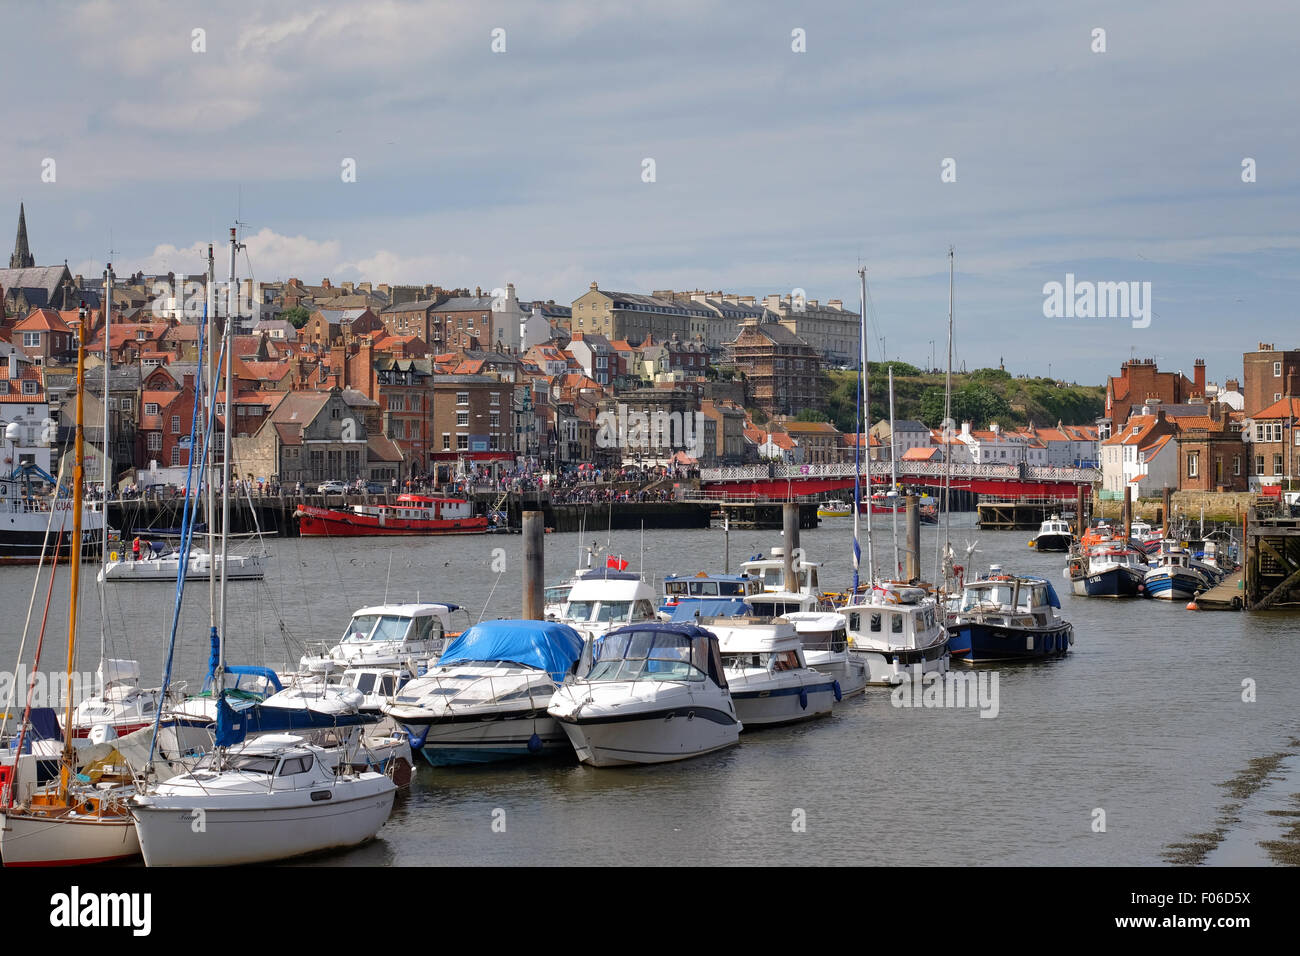 Whitby Harbour, Whitby, Yorkshire, UK Stock Photo